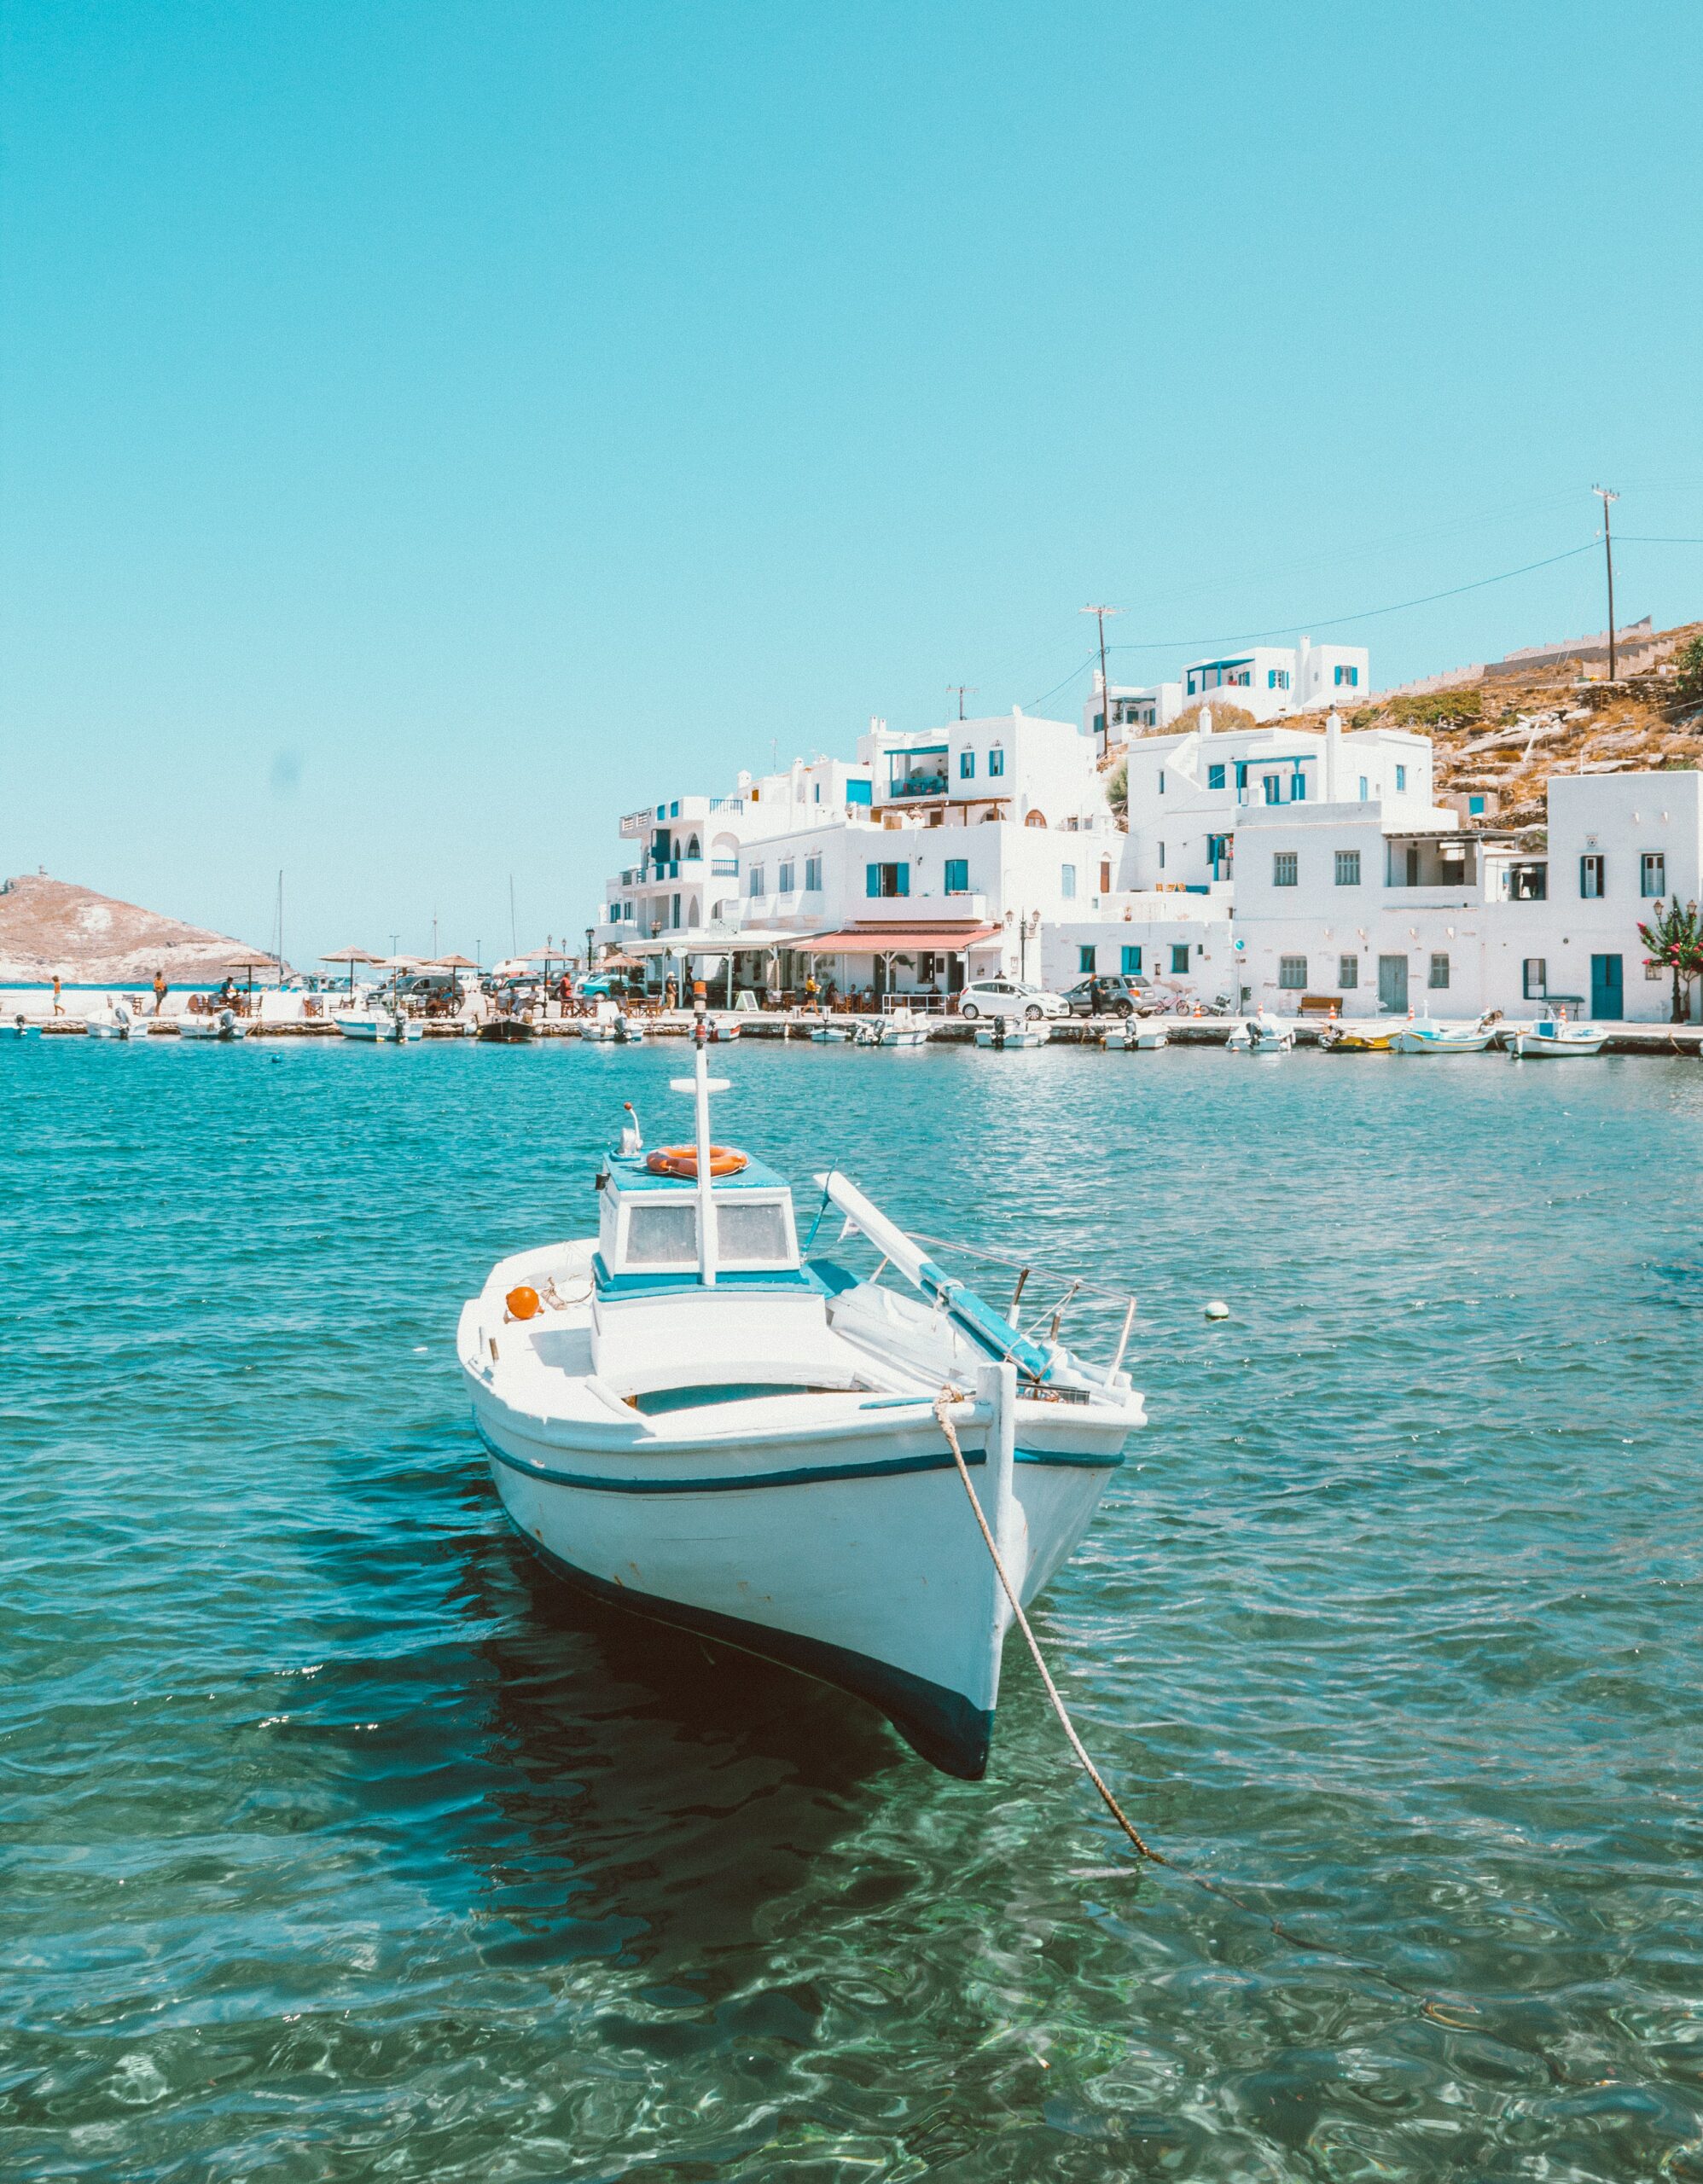 woody van der straeten zaP3iR5Gx6I unsplash scaled Greece seventh most sought-after destination in the world for family holidays in 2023